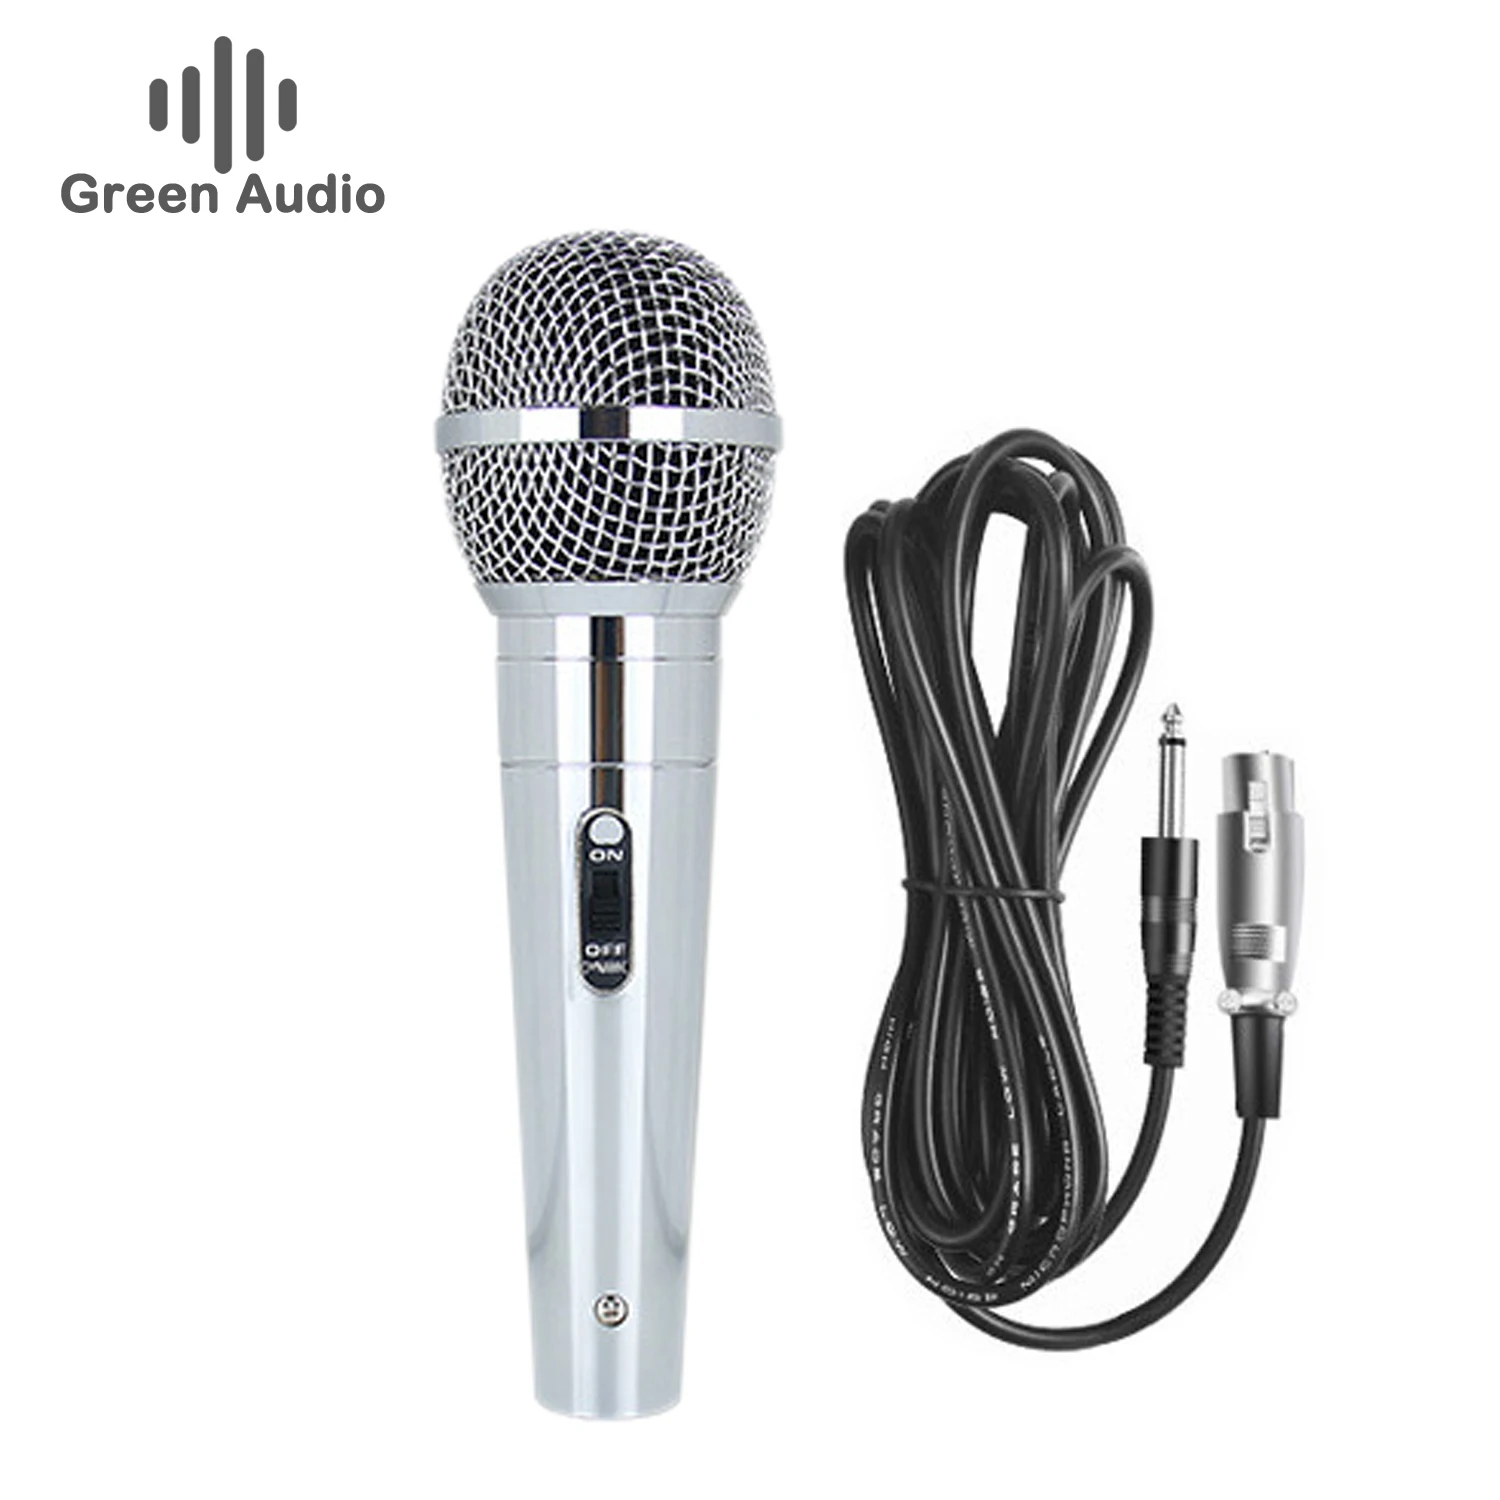 

GAM-590 Recordio Metal Handheld Speaker Microphone Wired Dynamic Microphone KTV Conference Performance